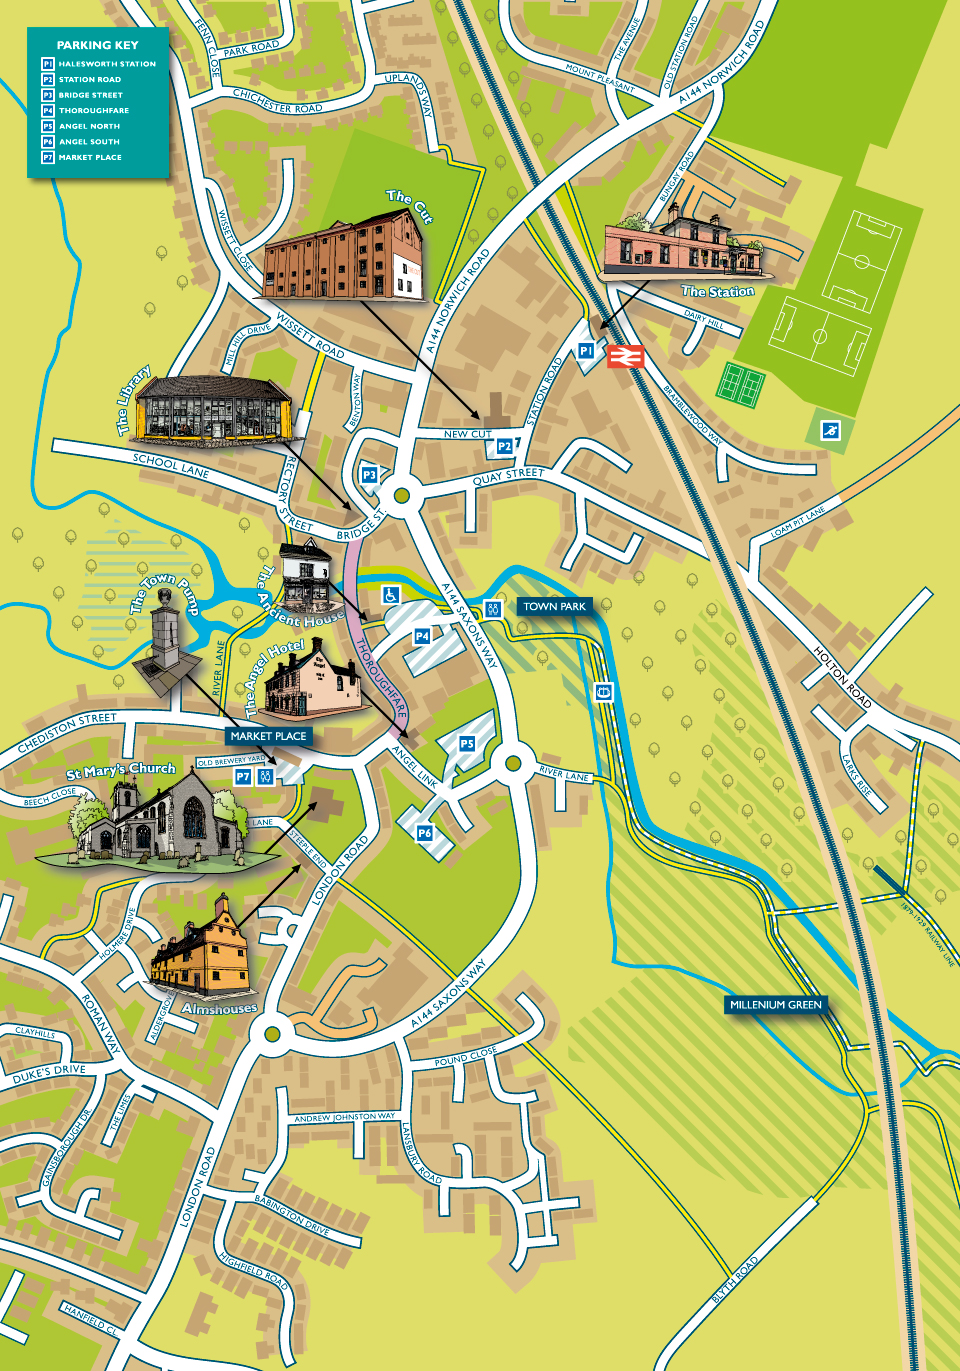 Illustrated map of Halesworth in Suffolk